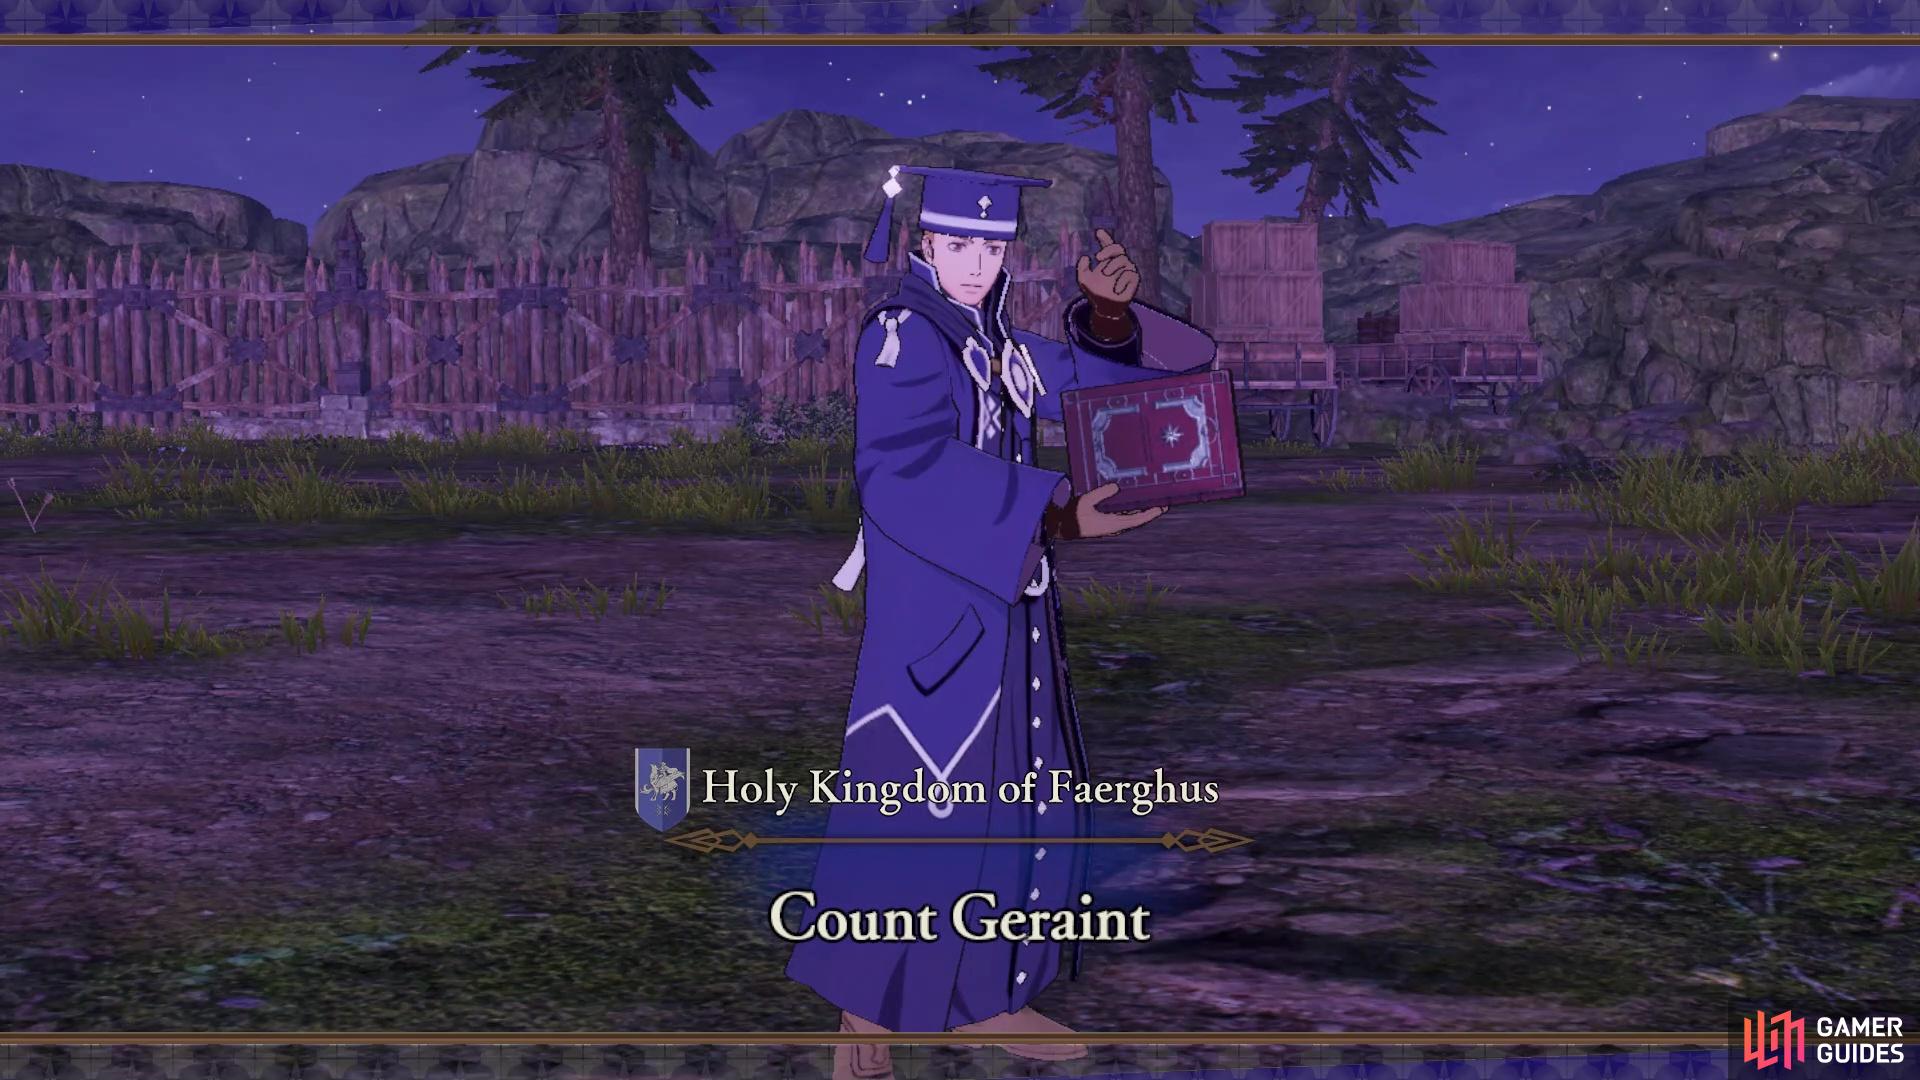 Geraint is a magic-user with a Tome